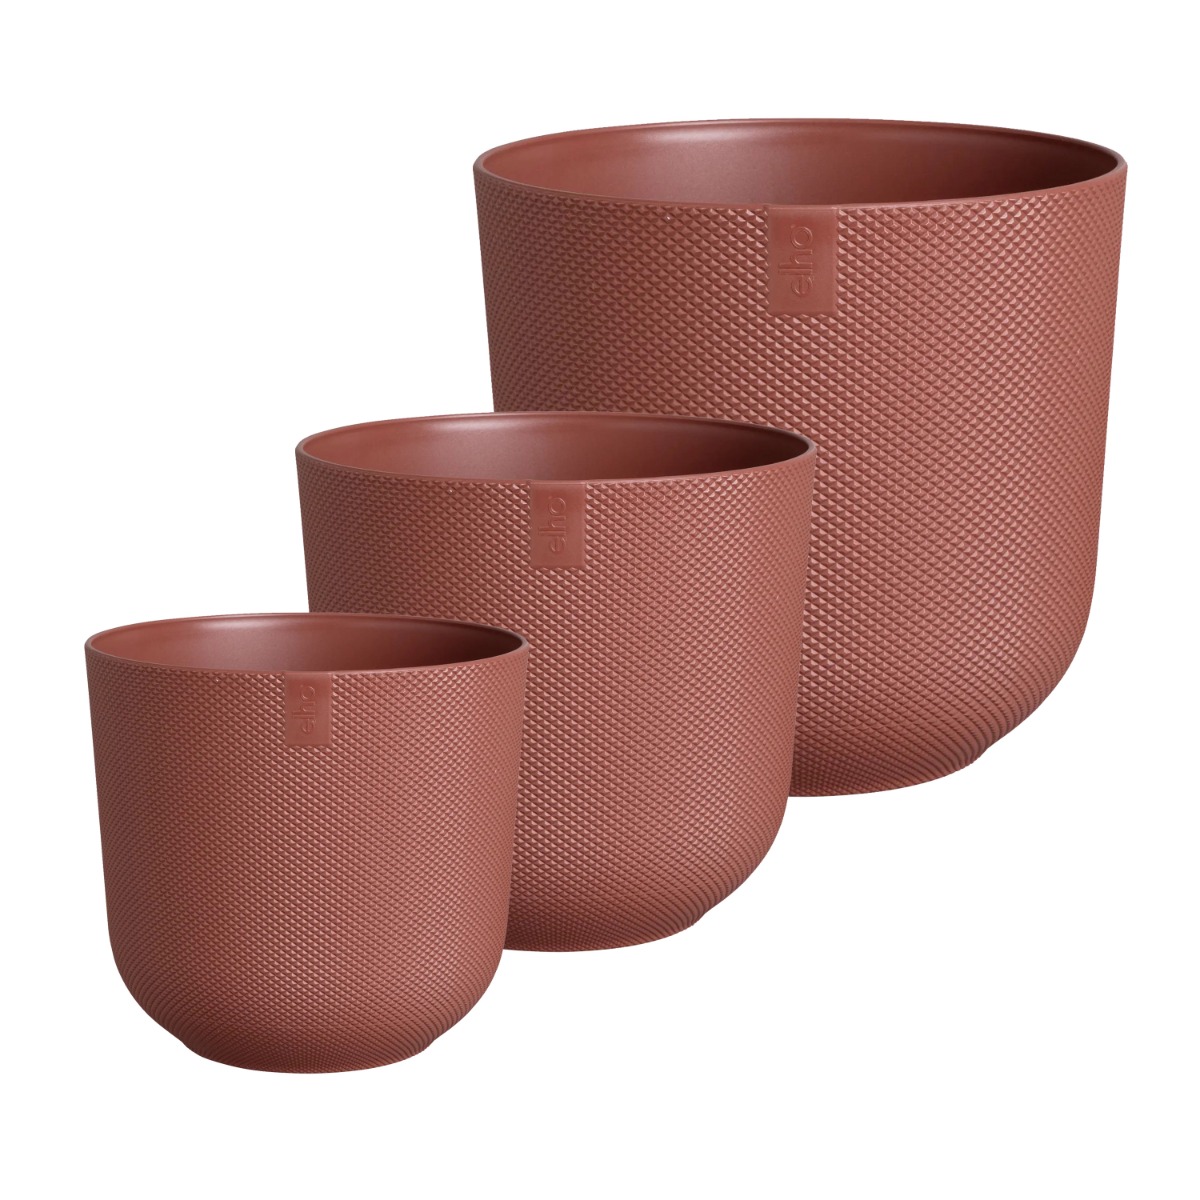 Elho Jazz Round Recycled Plastic Plant Pots - Tuscan Red - Set of 3